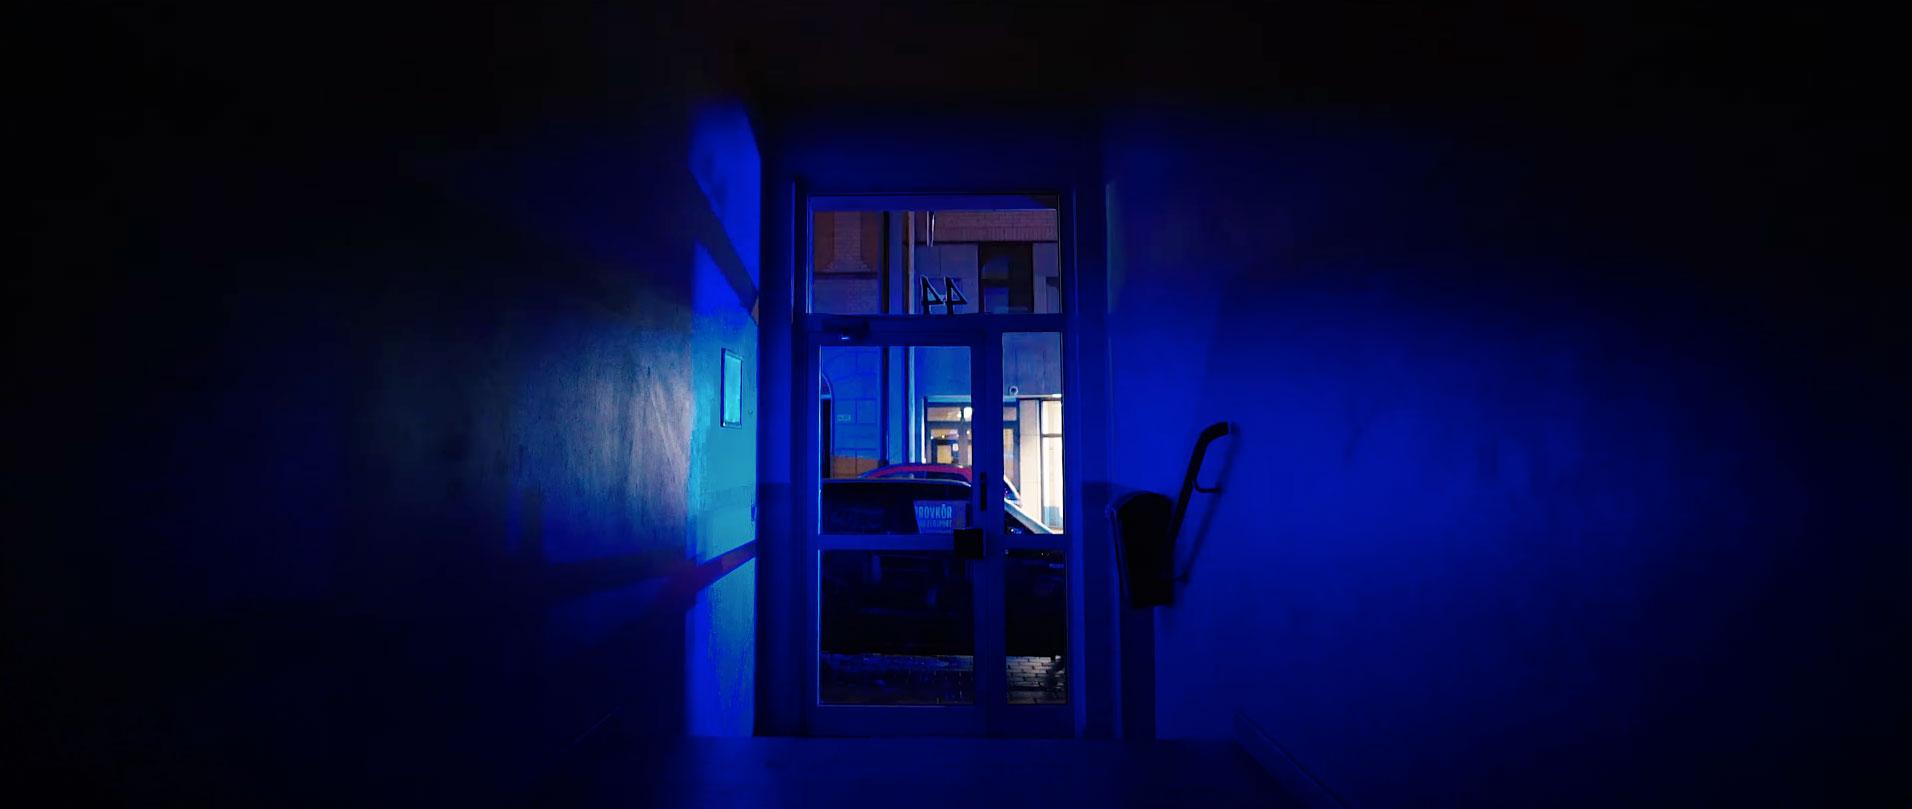 Hero Image Commercial Hallway at night lit up blue by light coming from the street through the glass door